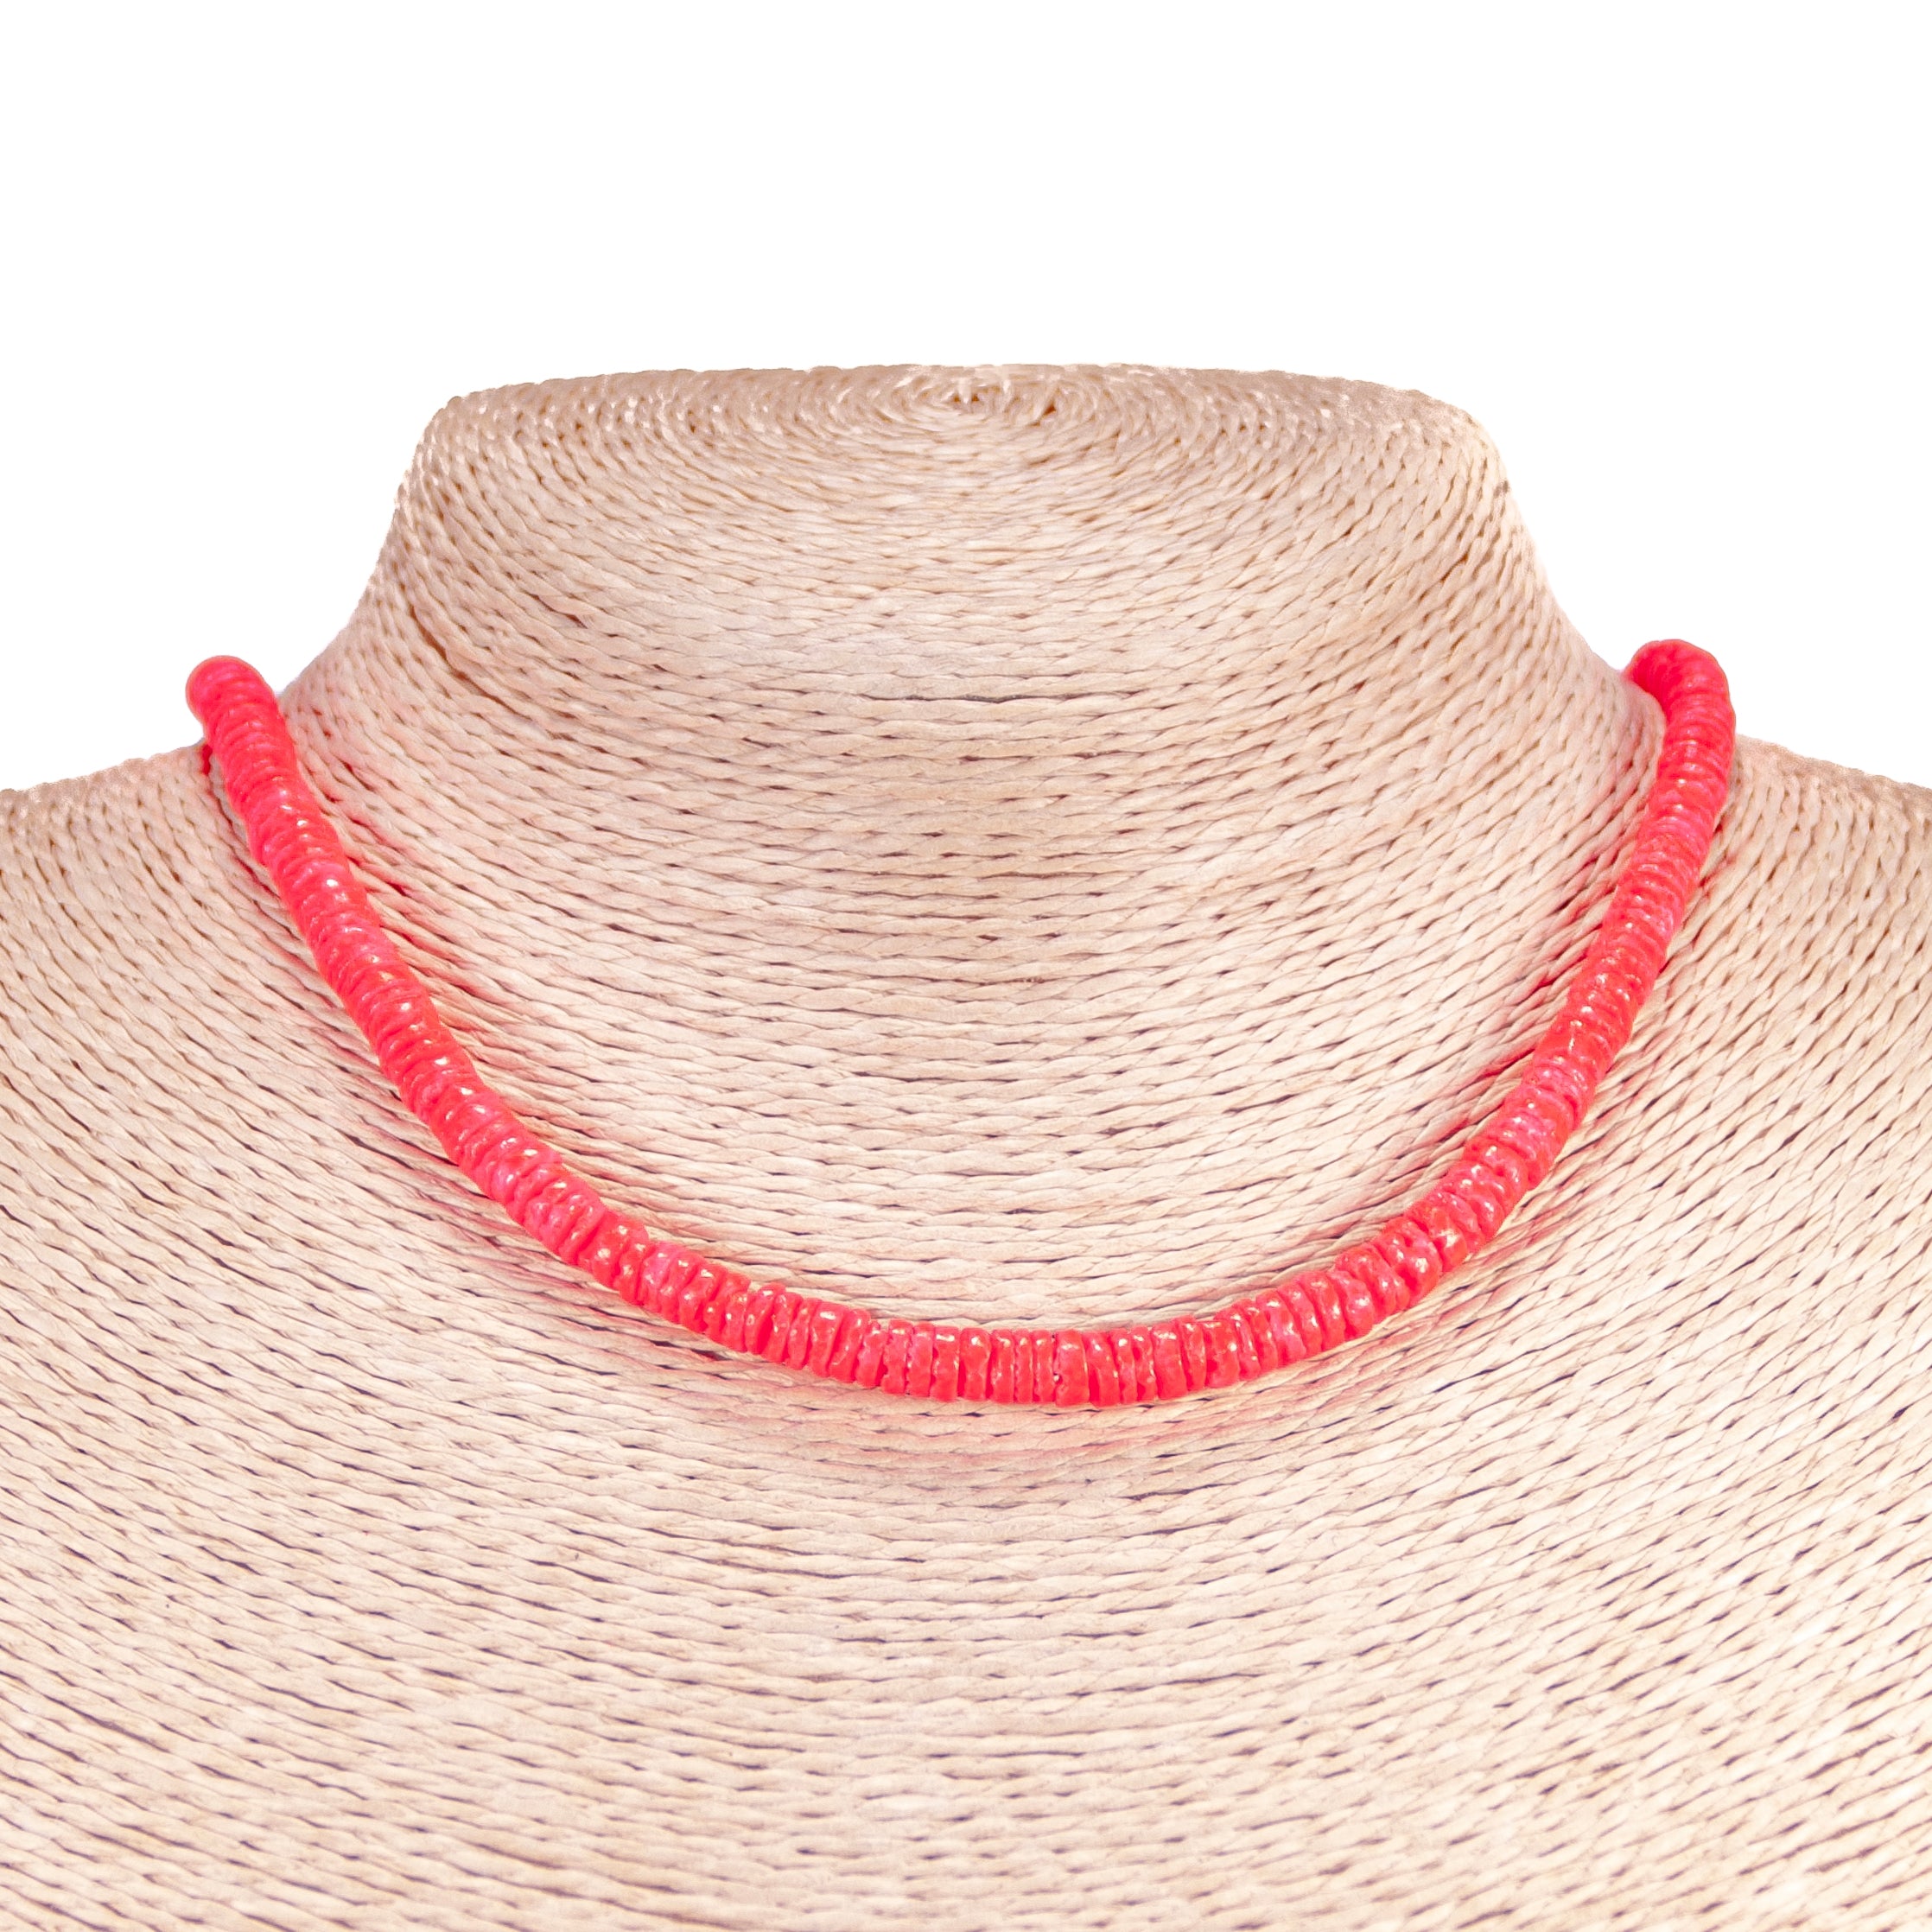 Neon Red Puka Shell Beads Necklace and Anklet Set